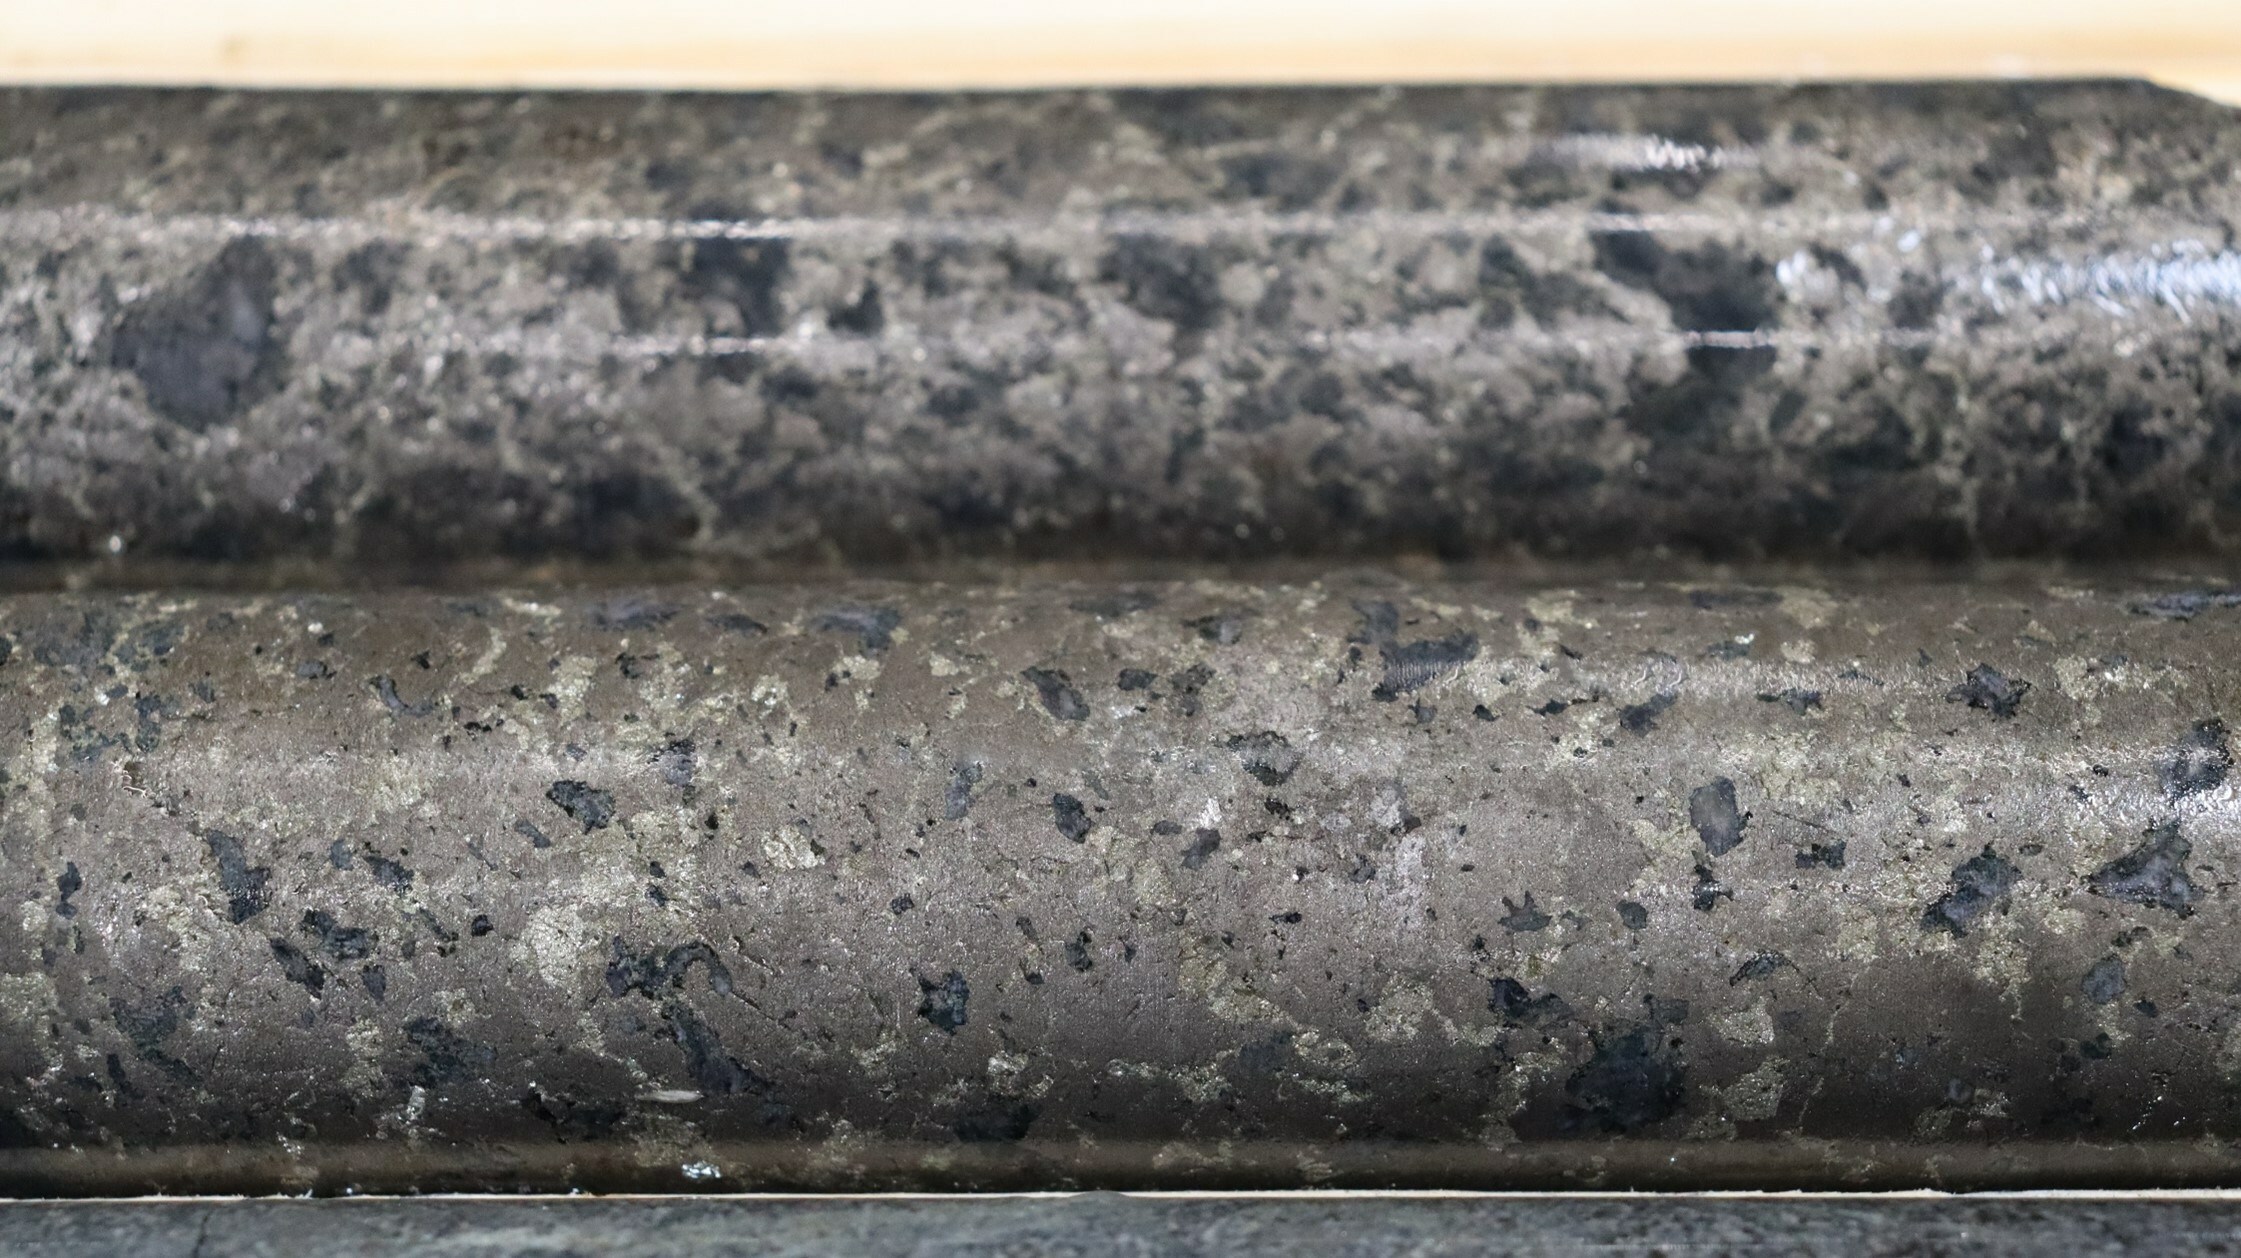 Photo 3: Massive sulphide mineralization from WG-23-026 with visible pentlandite. Core is NQ diameter measuring 47.6 millimetres. Photo is from a depth of 177.5 metres. (CNW Group/SPC Nickel Corp.)